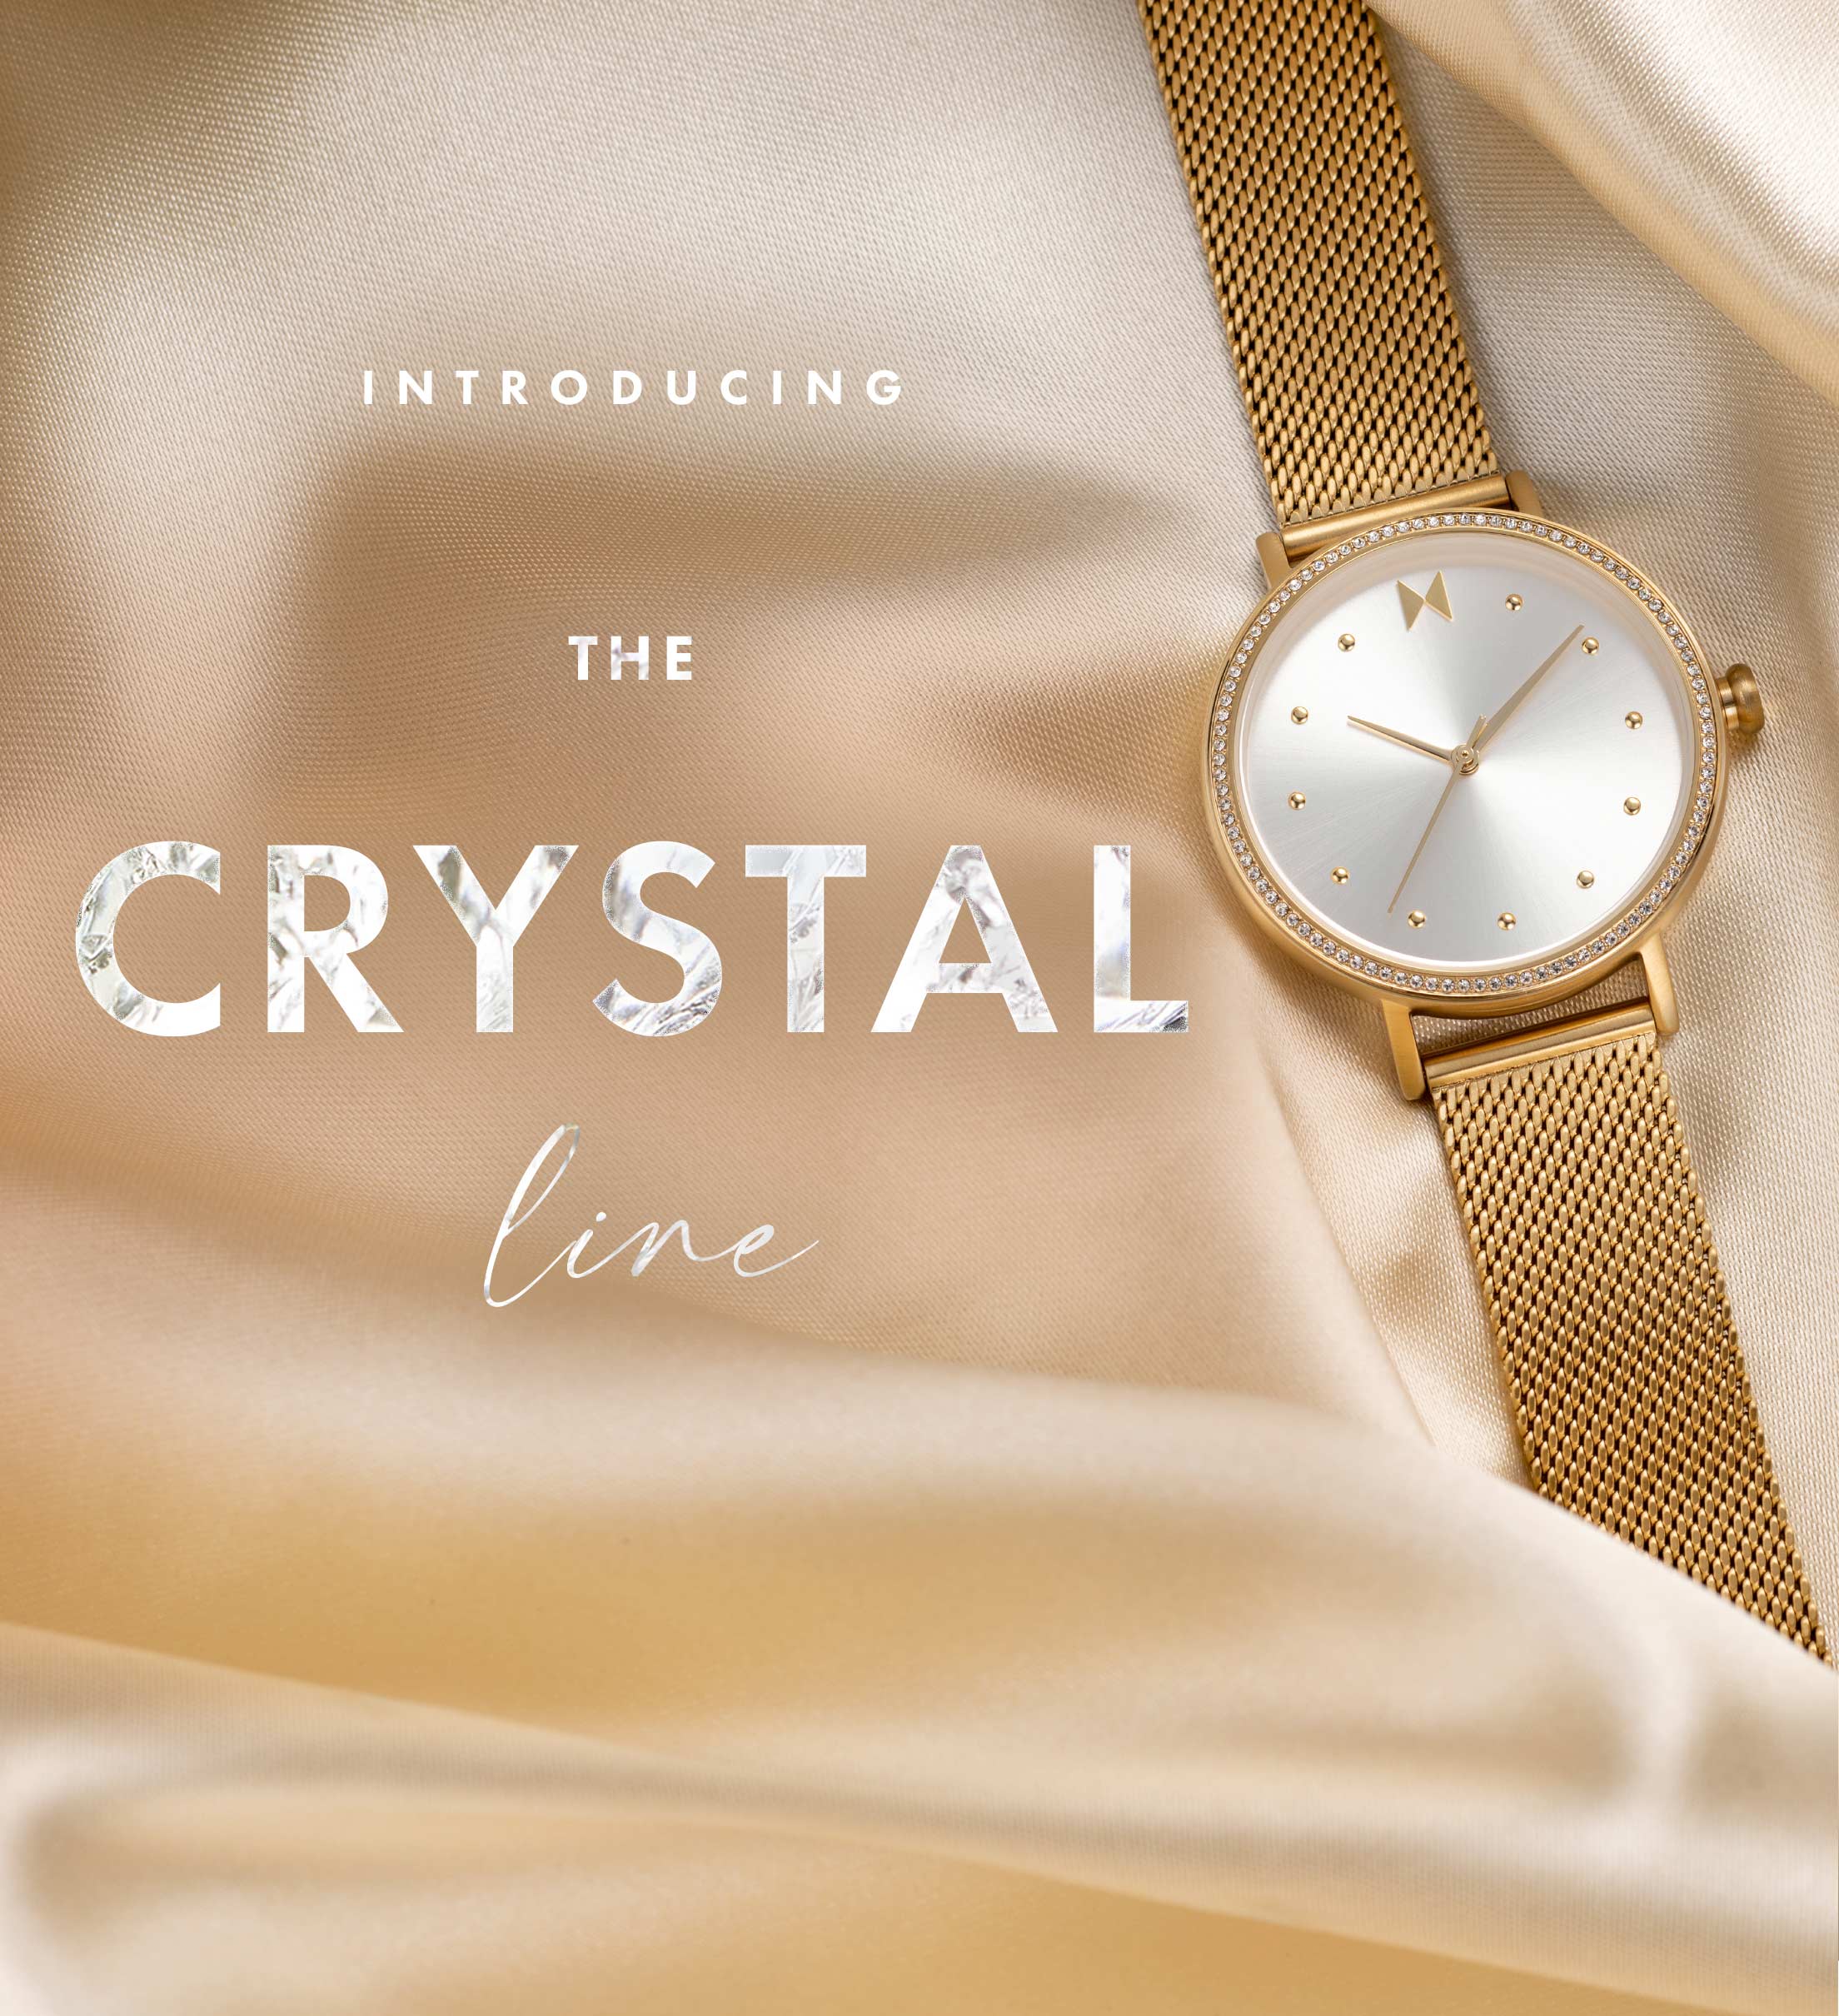 Introducing the Crystal Line